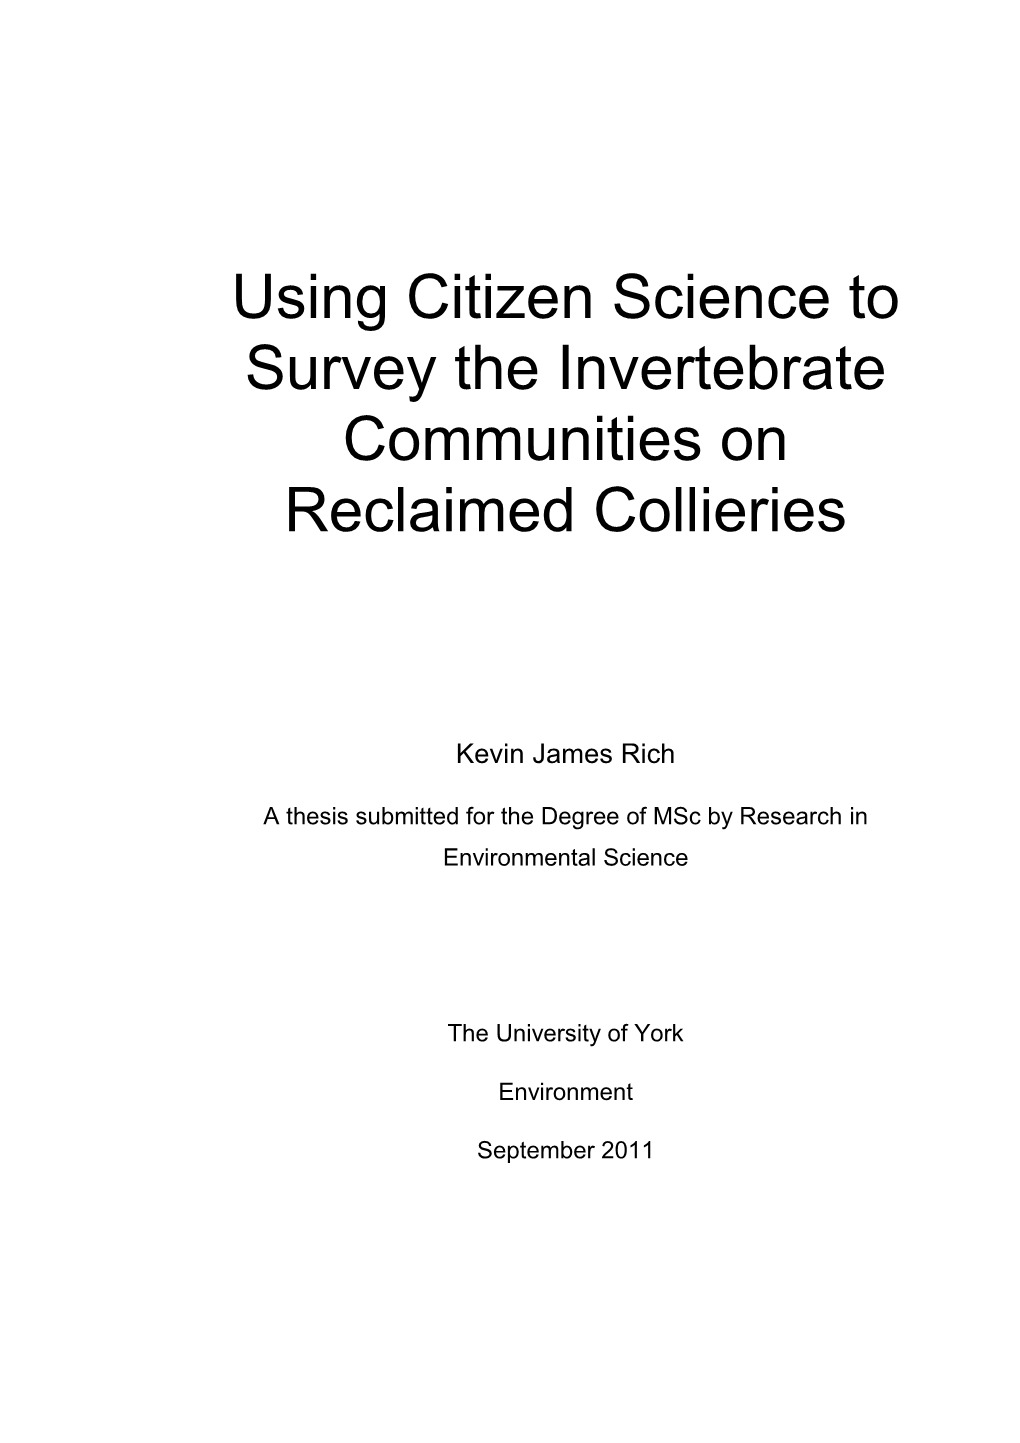 Using Citizen Science to Survey the Invertebrate Communities on Reclaimed Collieries